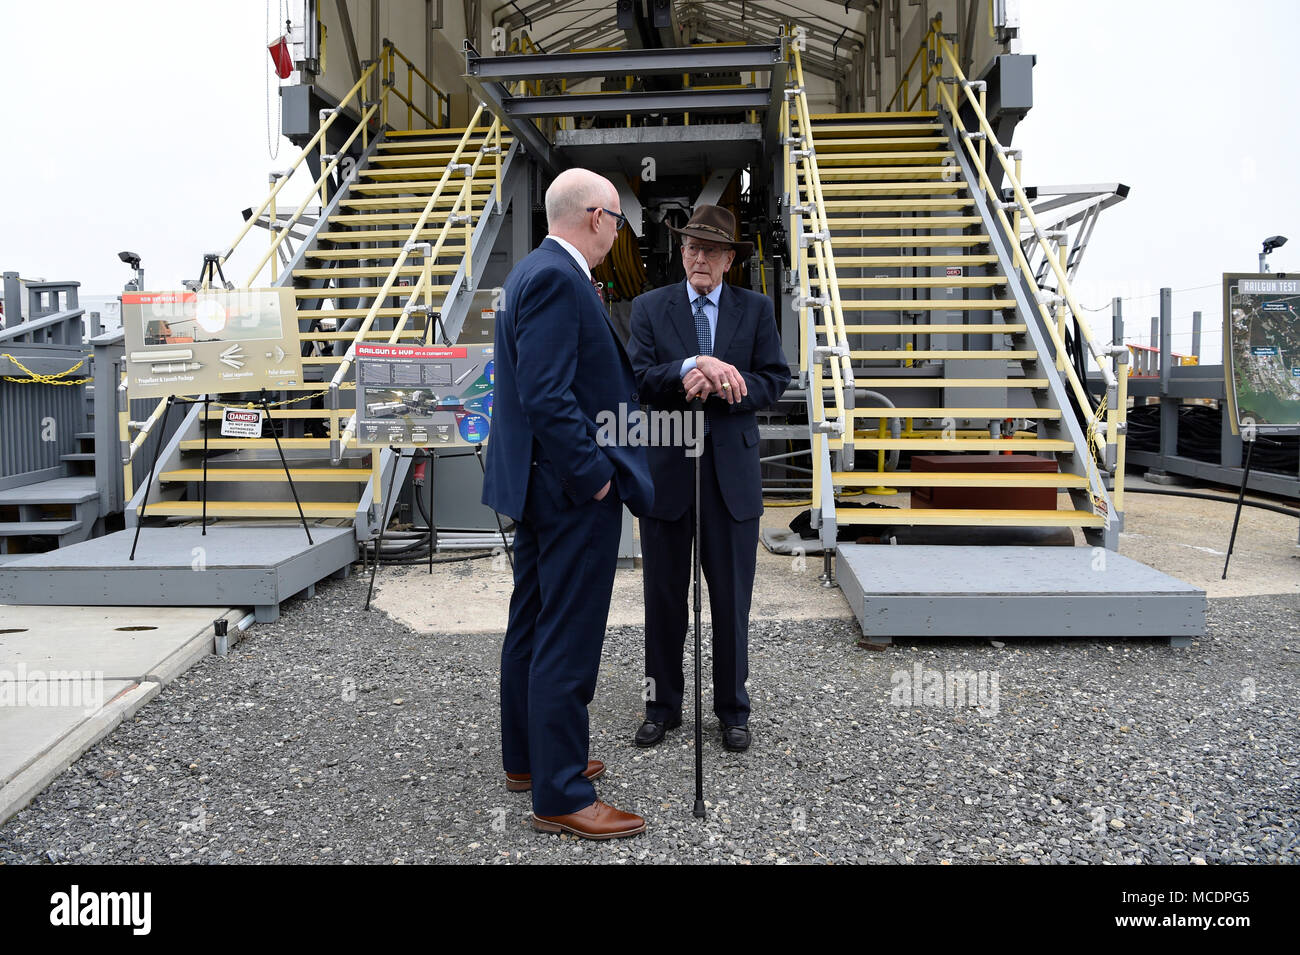 180222-N-PO203-214 DAHLGREN, Va. (Feb. 22, 2018) Retired Adm. James Hogg, right, talks with Don McCormack, executive director, Naval Surface and Undersea Warfare Centers, during a visit to the Electromagnetic Railgun (EMRG) at Naval Surface Warfare Center, Dahlgren Division. Adm. Hogg, along with Dr. Hans Mark, former Secretary of the Air Force, were honored during a EMRG line naming ceremony. As public servants Hogg and Mark laid the foundation for the U.S. Navy Railgun program and led the effort to explore and illustrate to senior leadership the warfighting advantages of this game-changing t Stock Photo